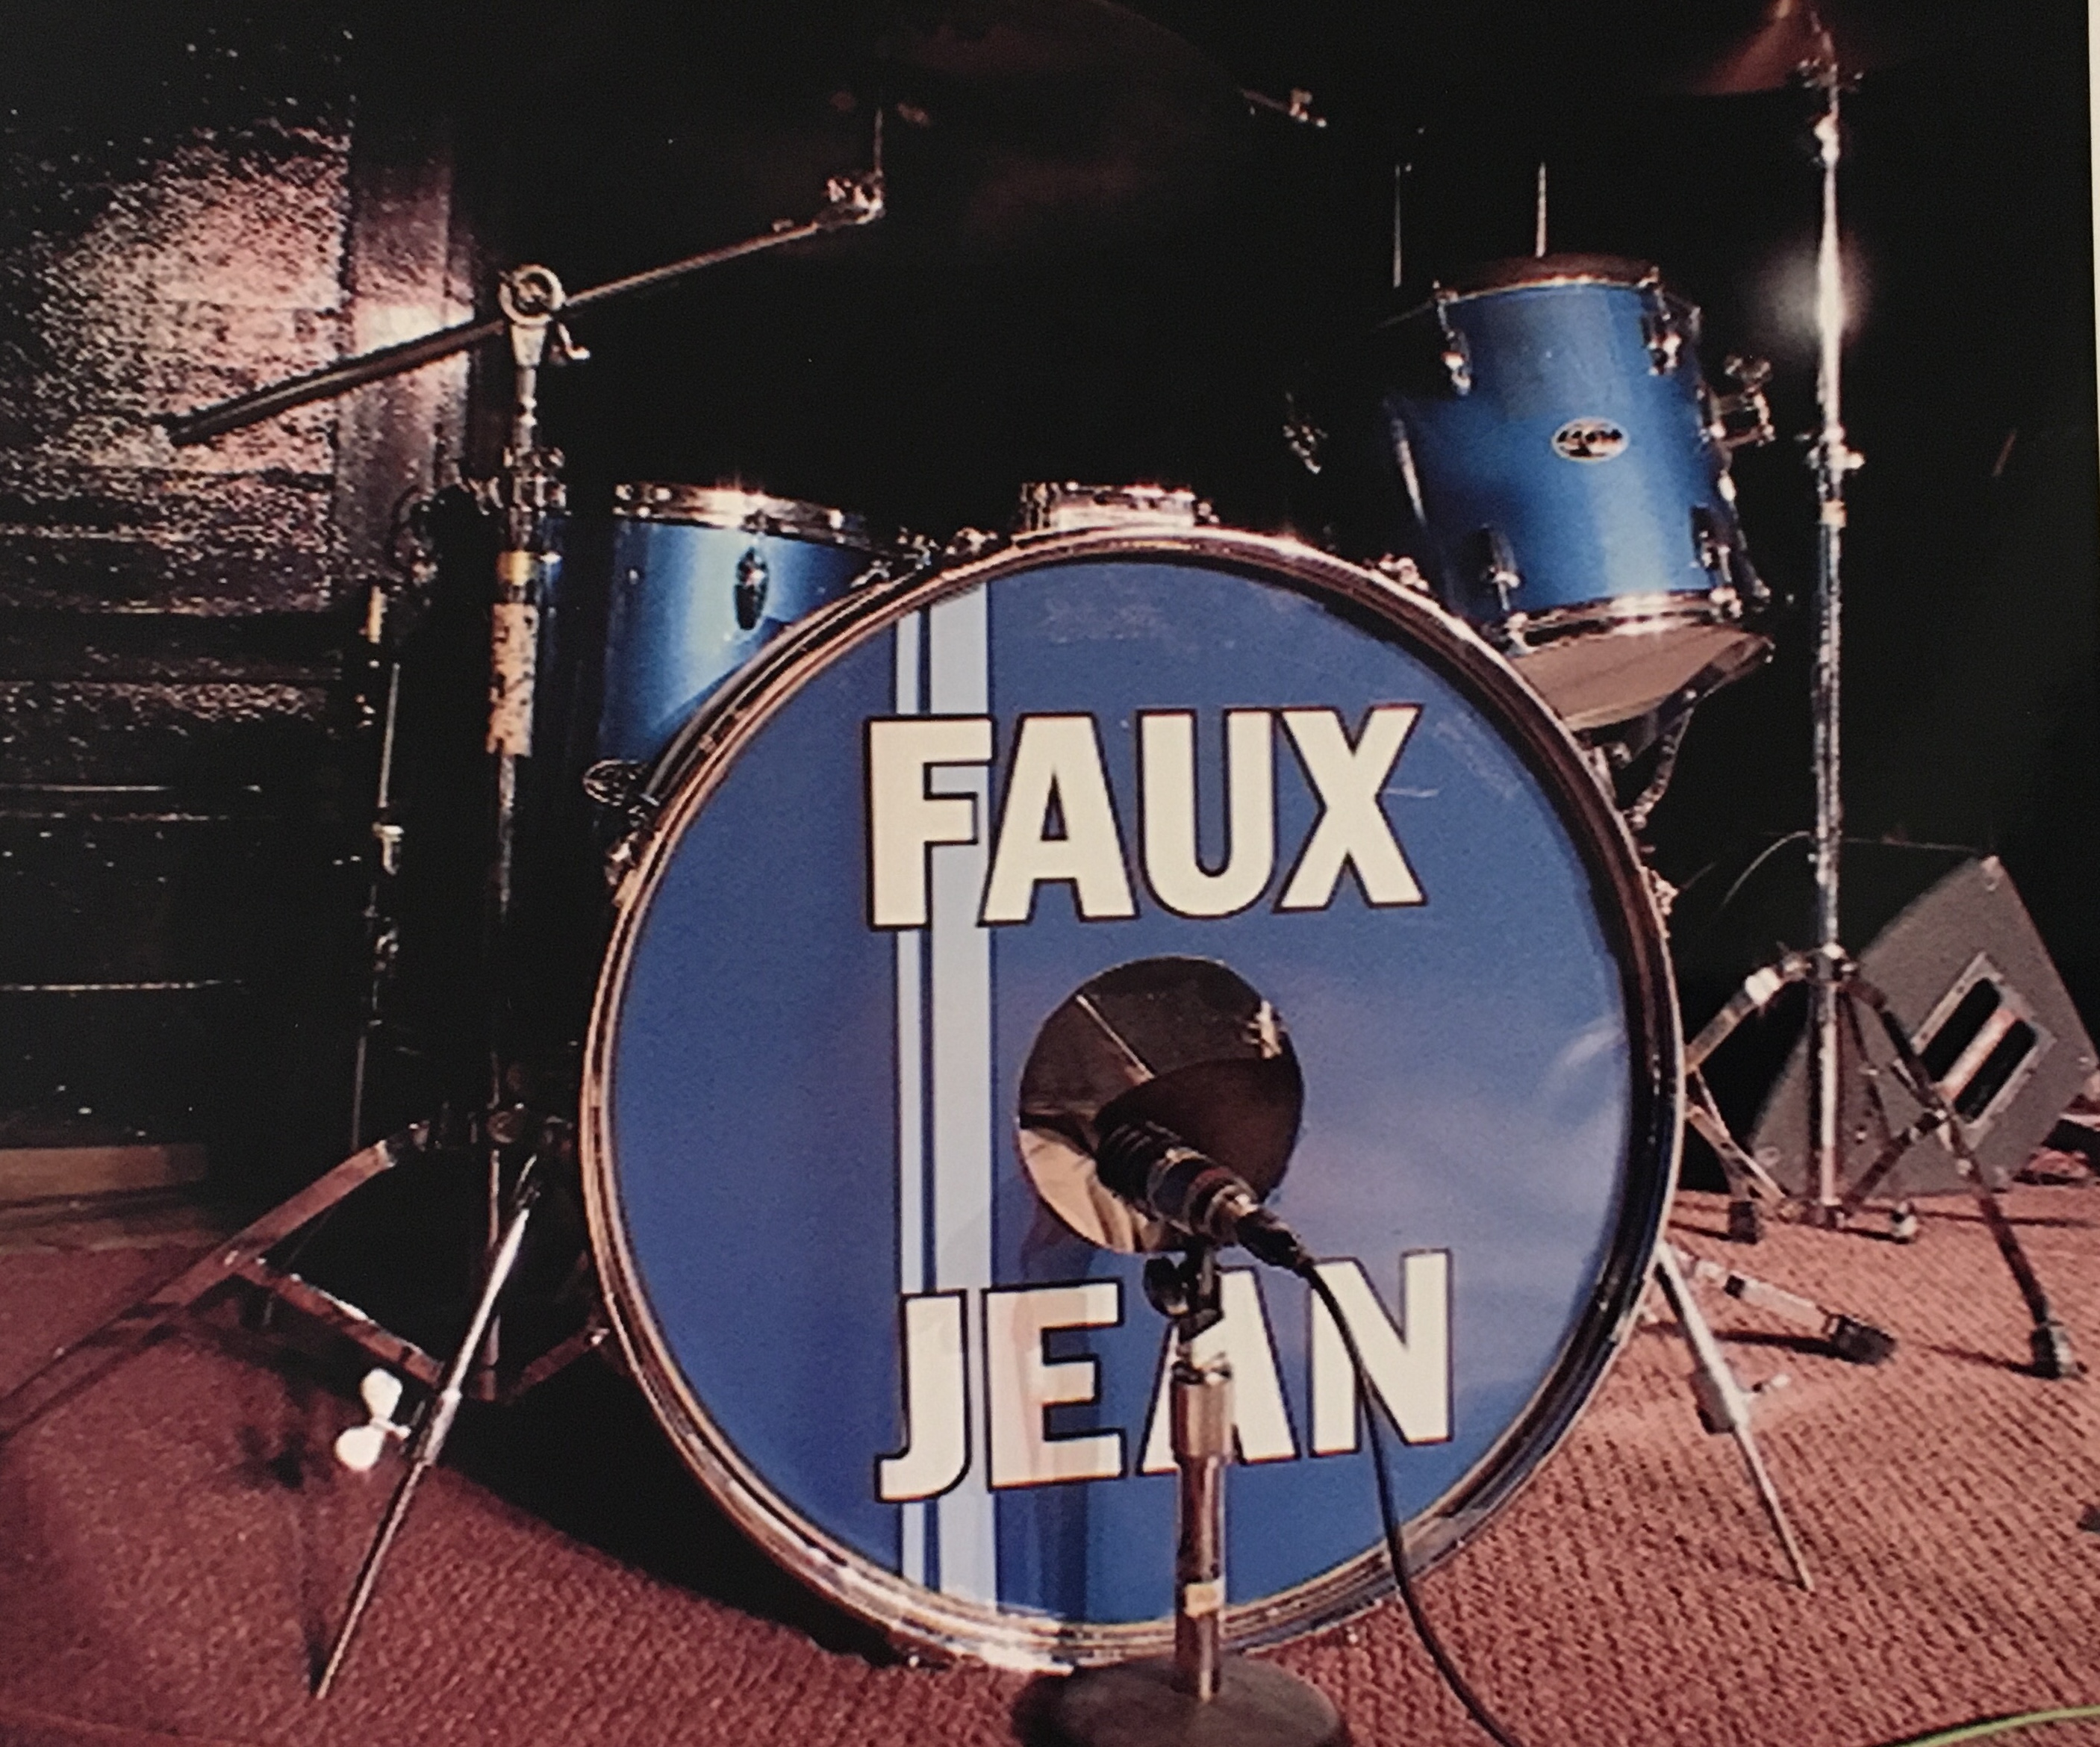 dax made this cool faux jean kick drum cover for grinder.